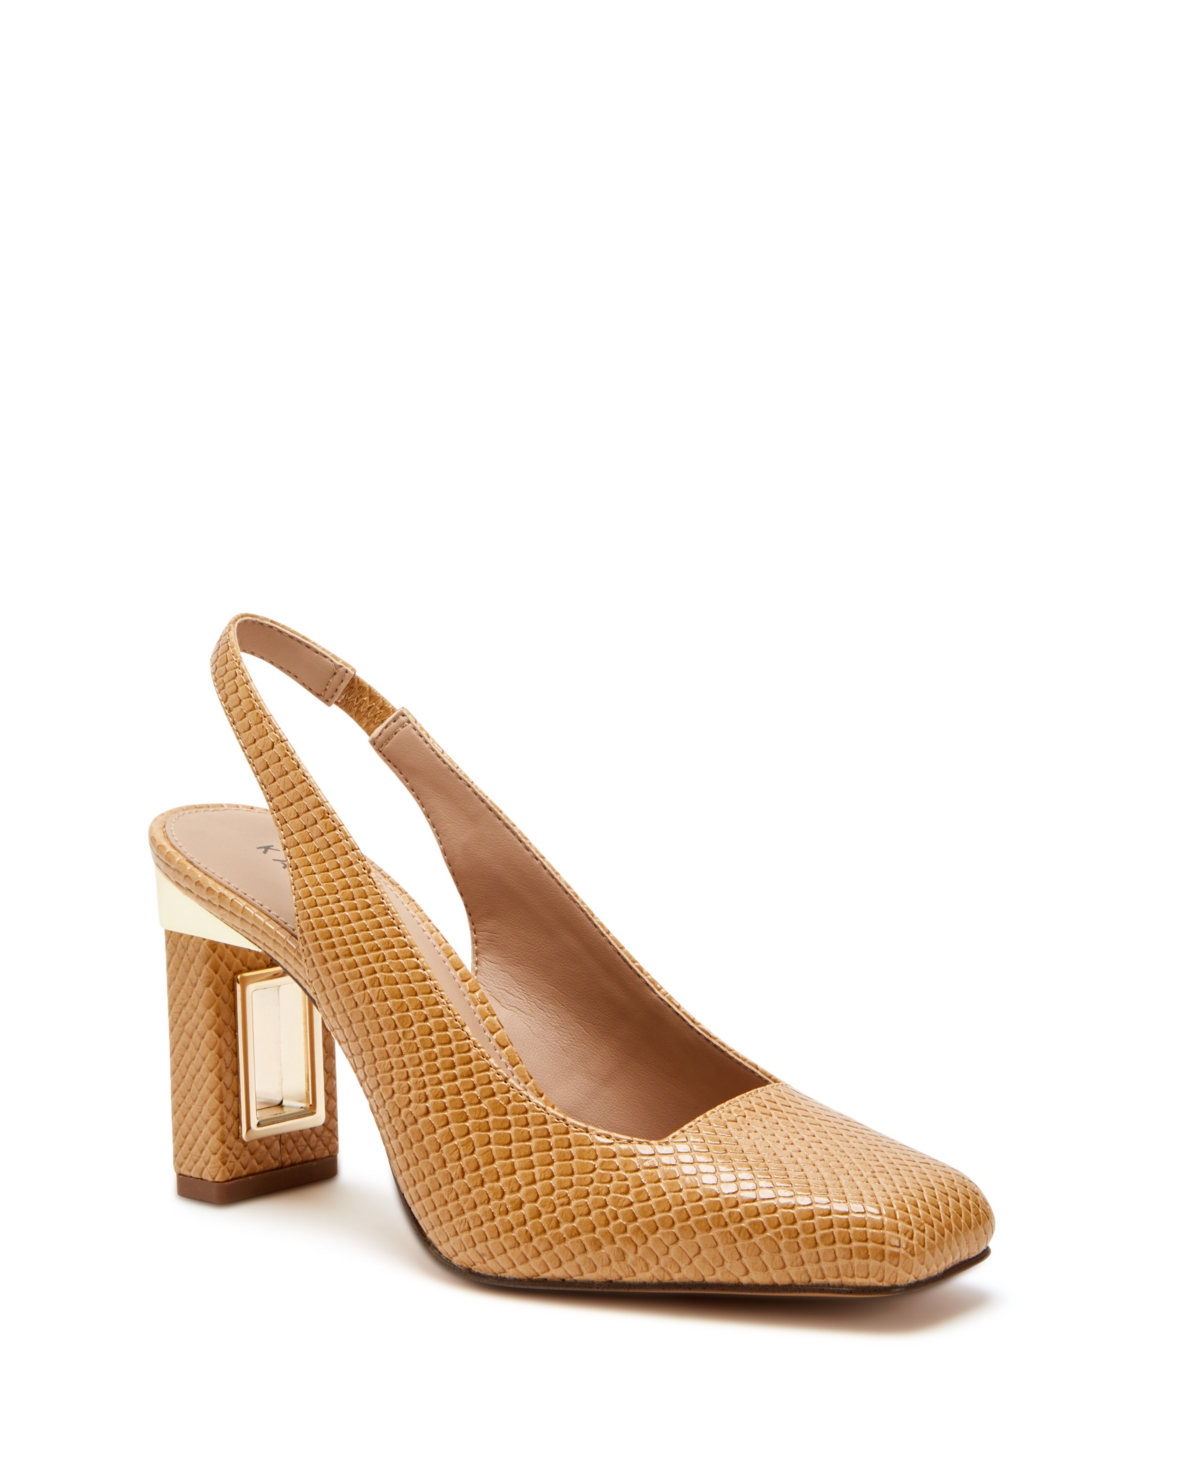 Shop Katy Perry Women's The Hollow Heel Sling Back Pumps In Biscotti